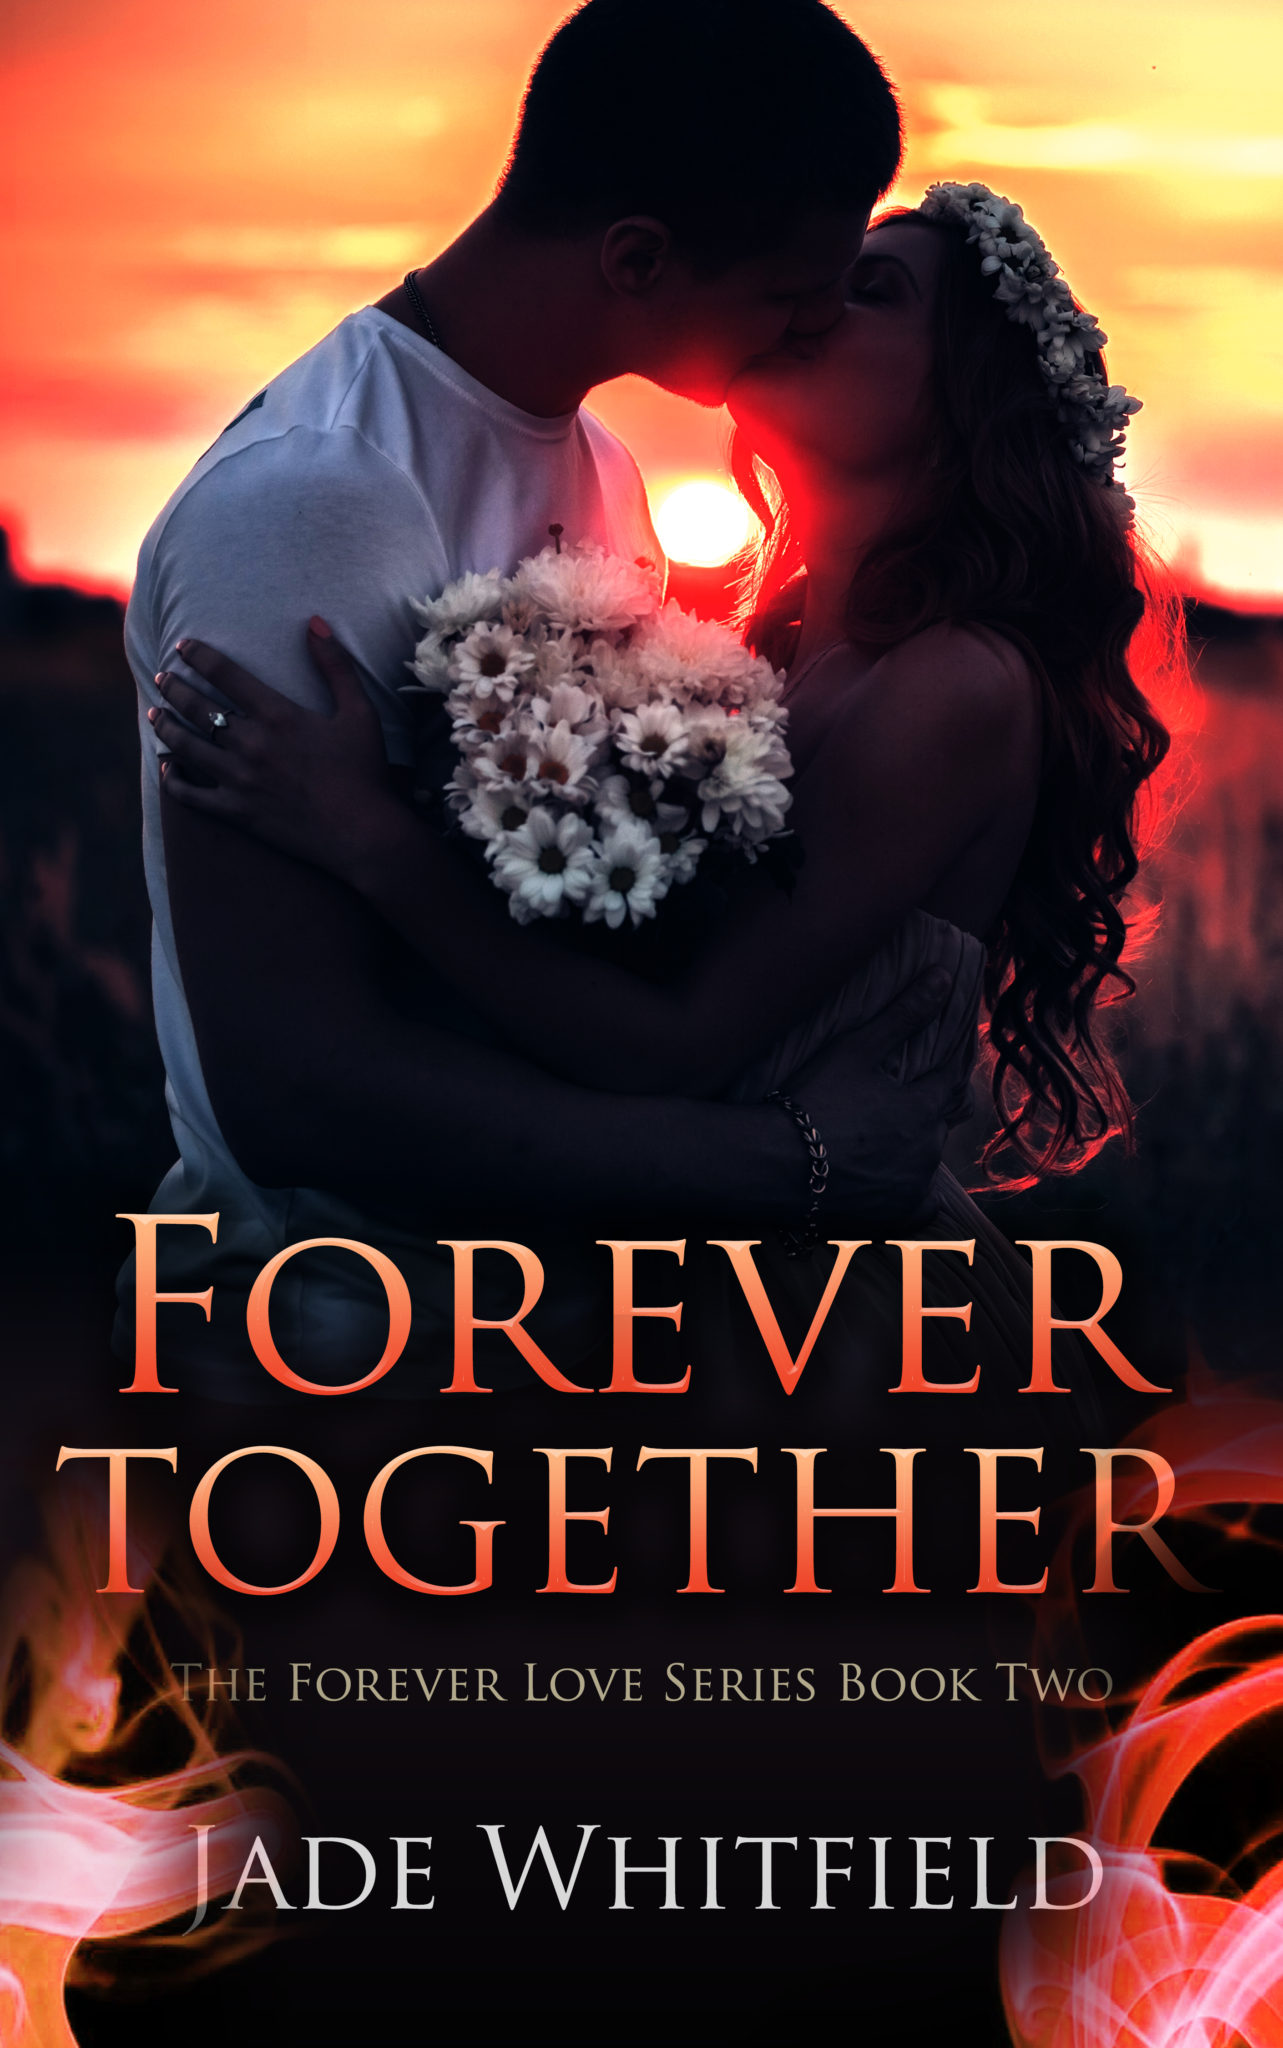 FREE: Forever Love by Jade Whitfield